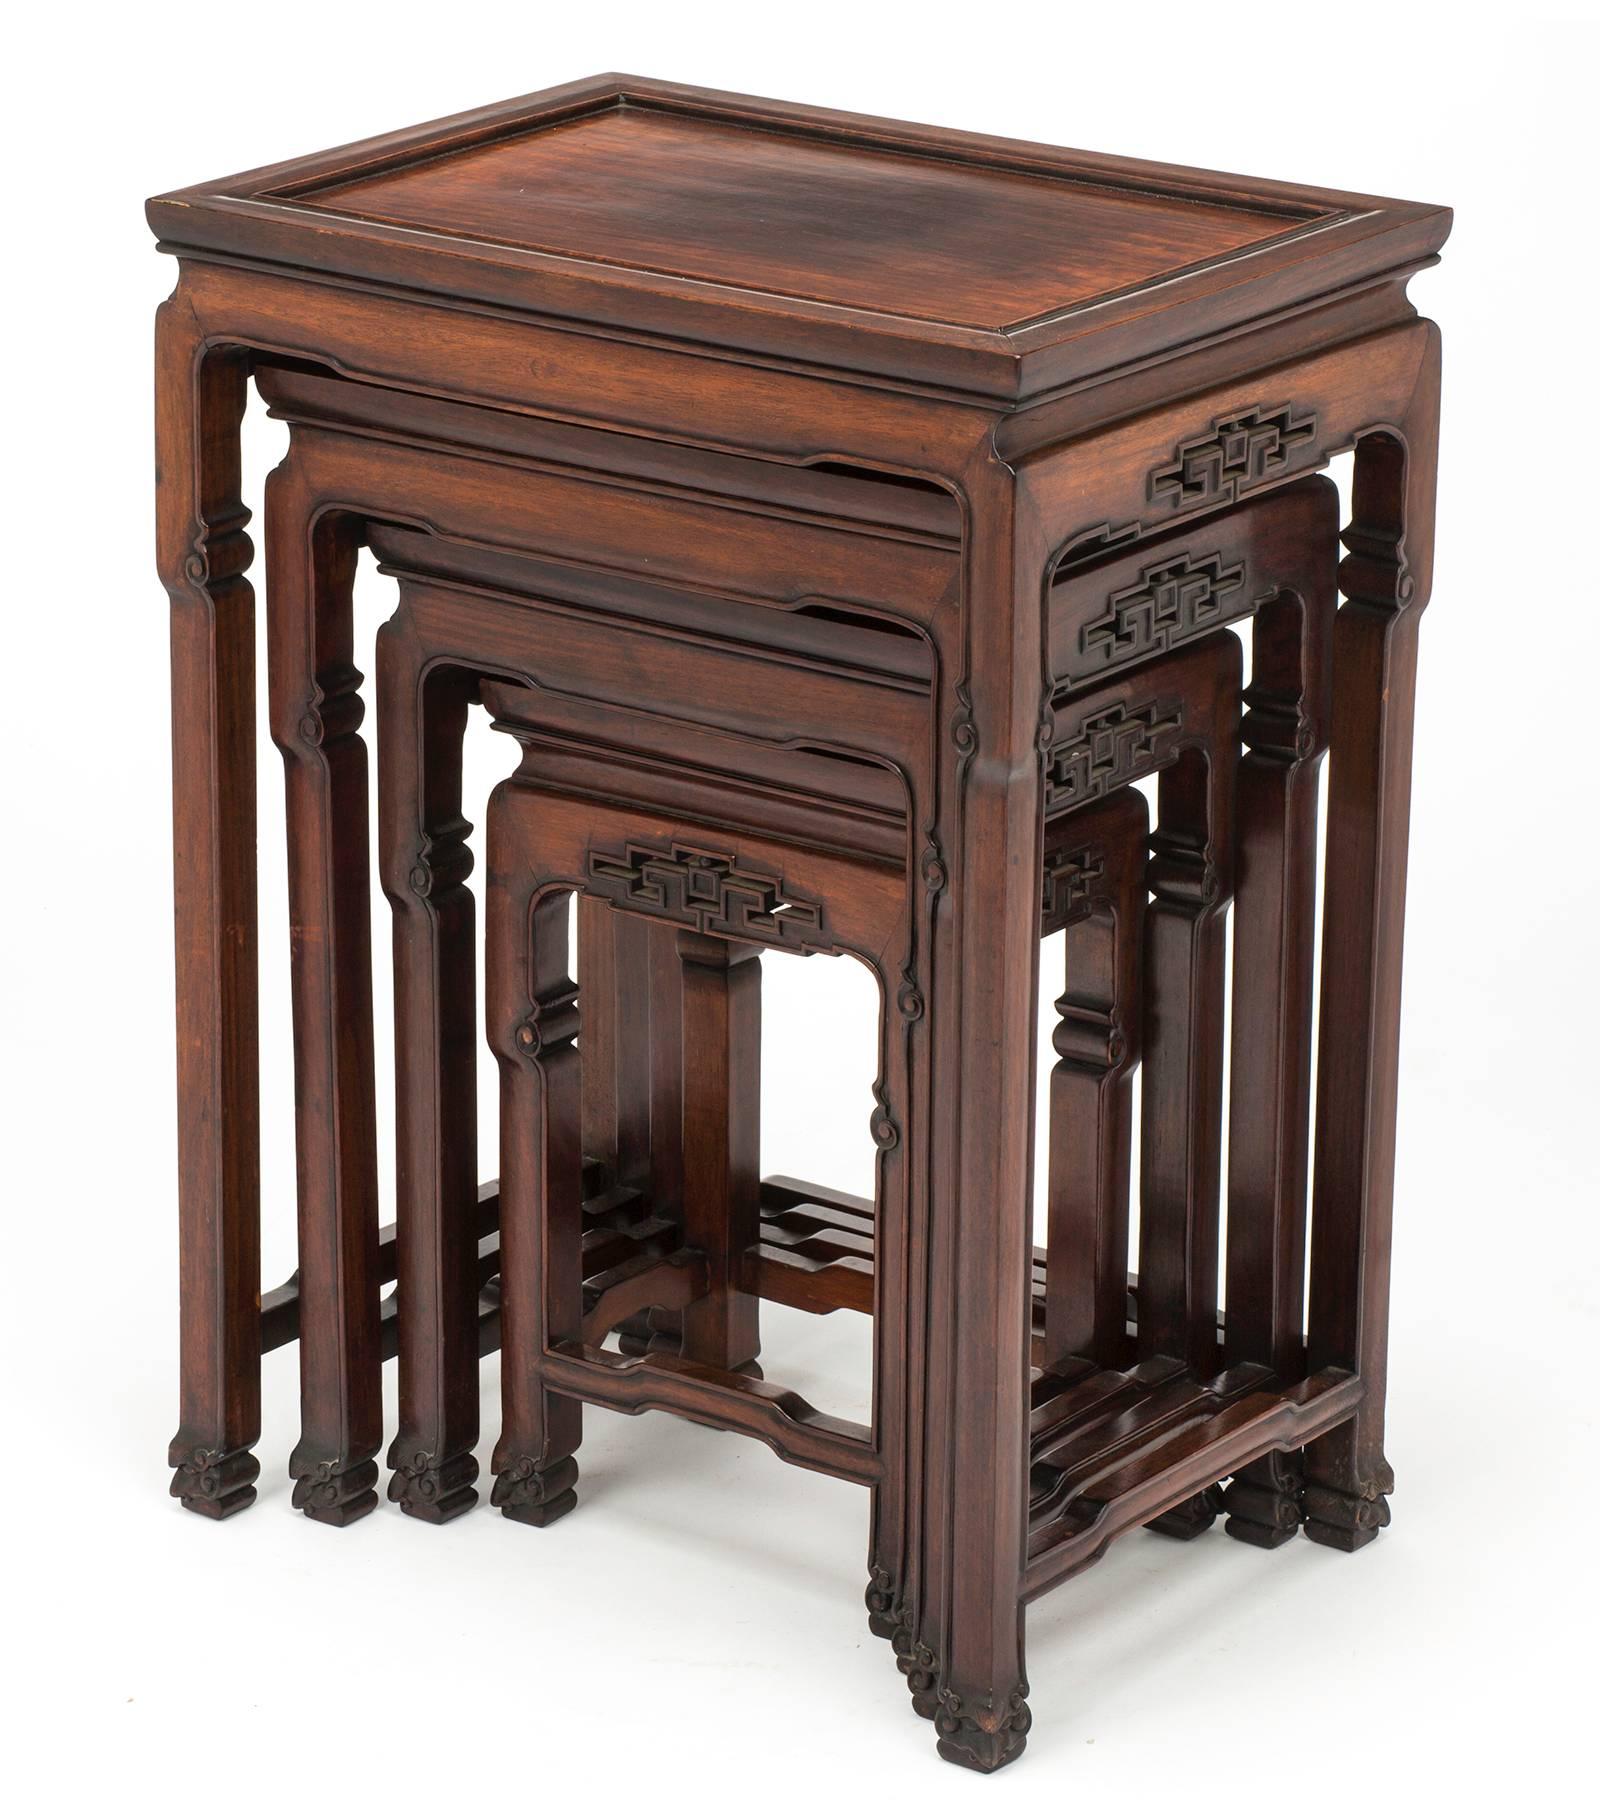 Handsome set of four nesting tables. It is made of rosewood, beautifully aged over the years with carved aprons. Simple and beautifully made. A very practical and useful set. Nesting table sizes: 14 D x 20 W x 27 H, 12 D x 17 W x 23.75 H, 9.75 D x